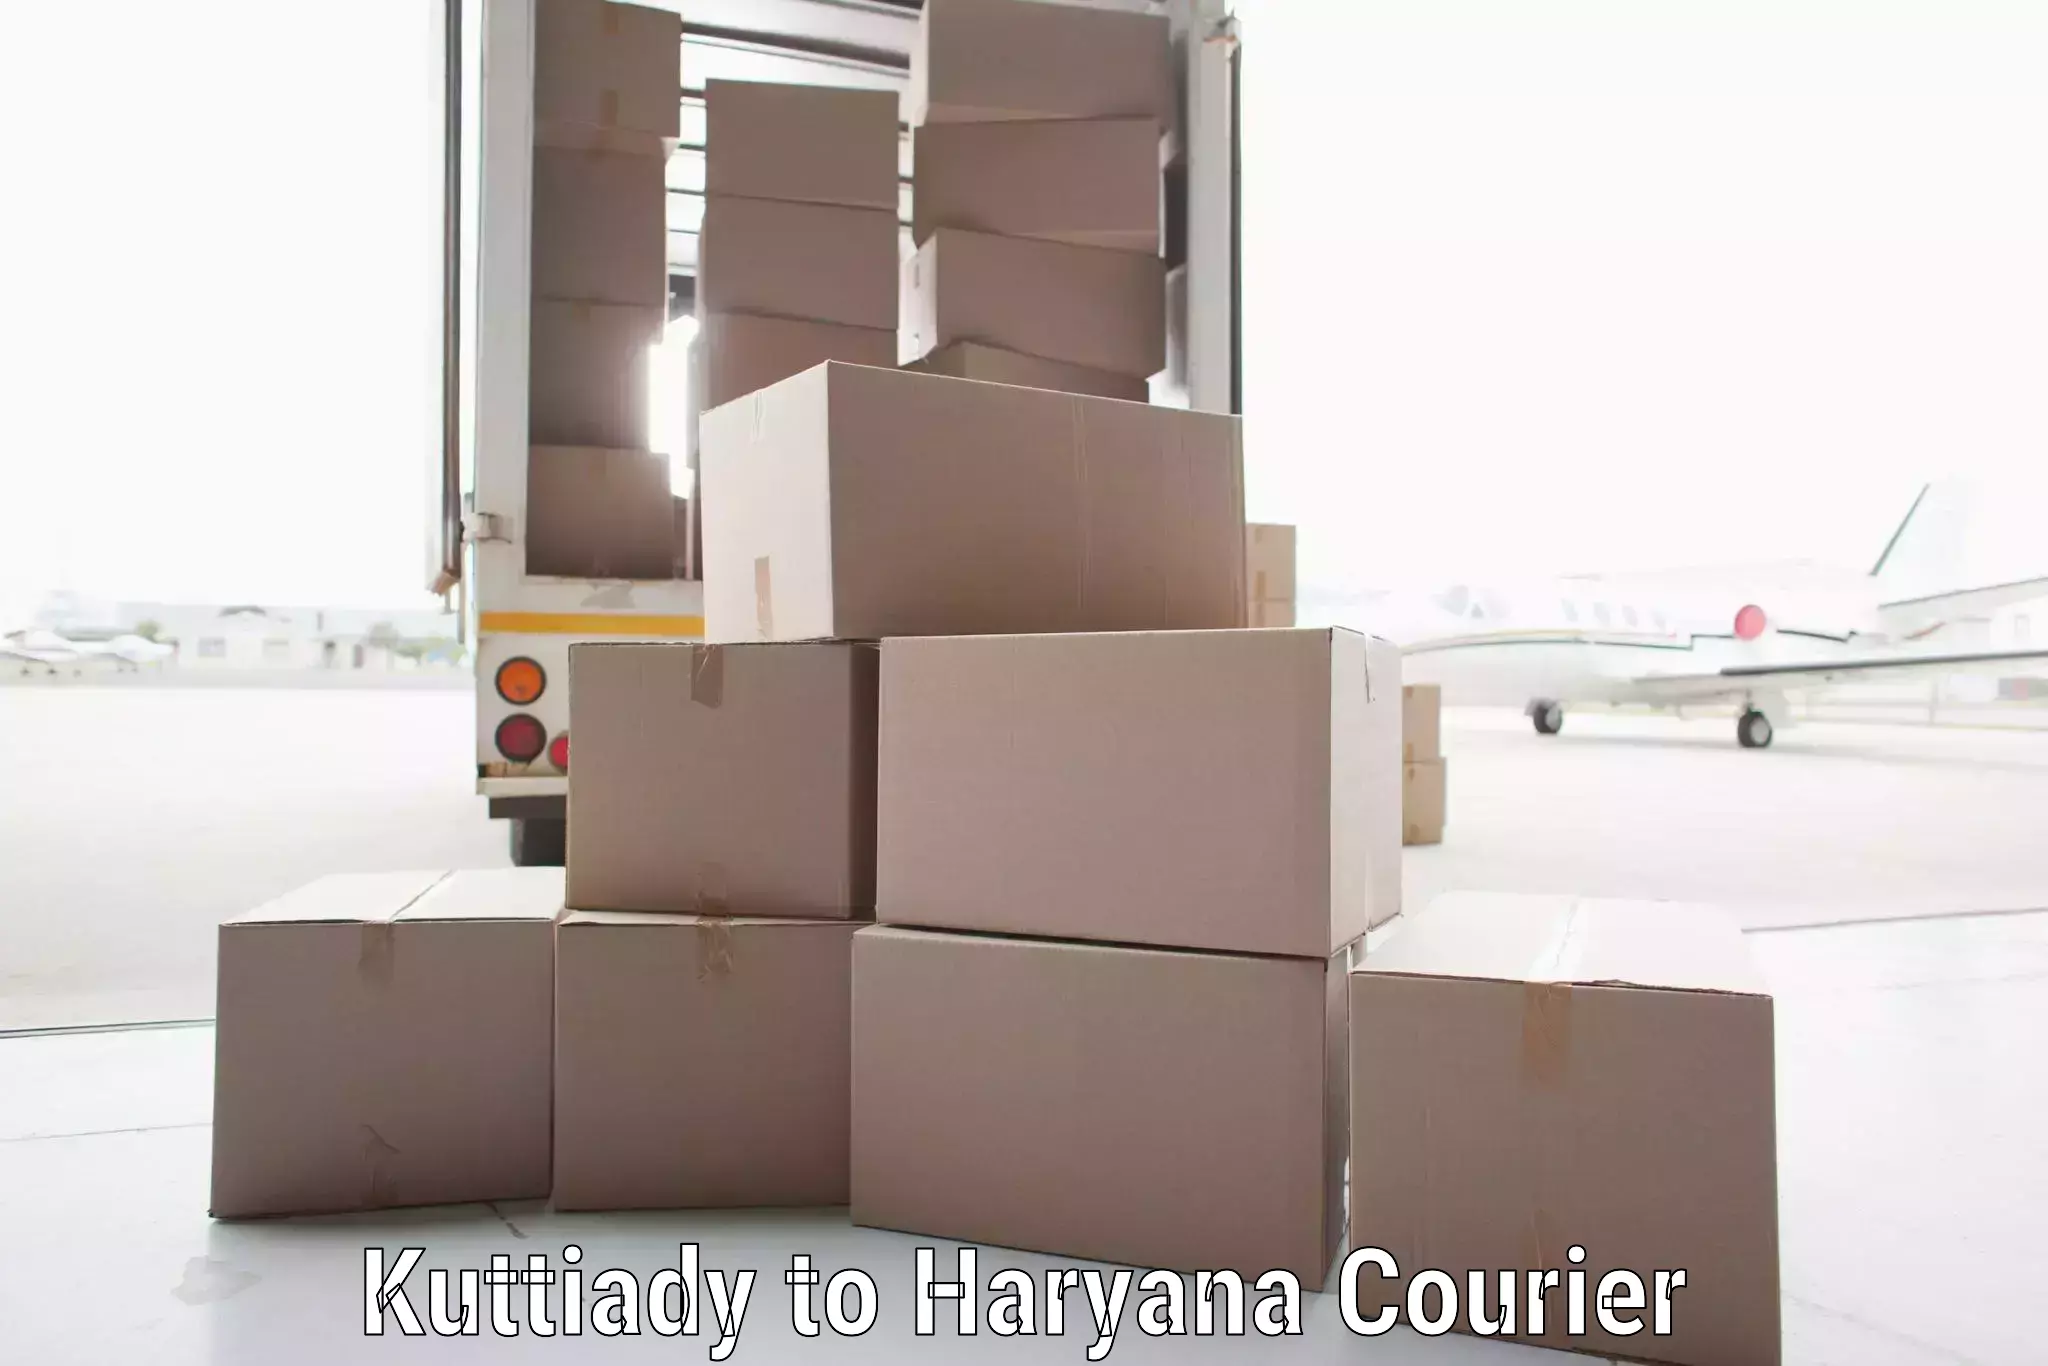 Courier service booking Kuttiady to Chaudhary Charan Singh Haryana Agricultural University Hisar